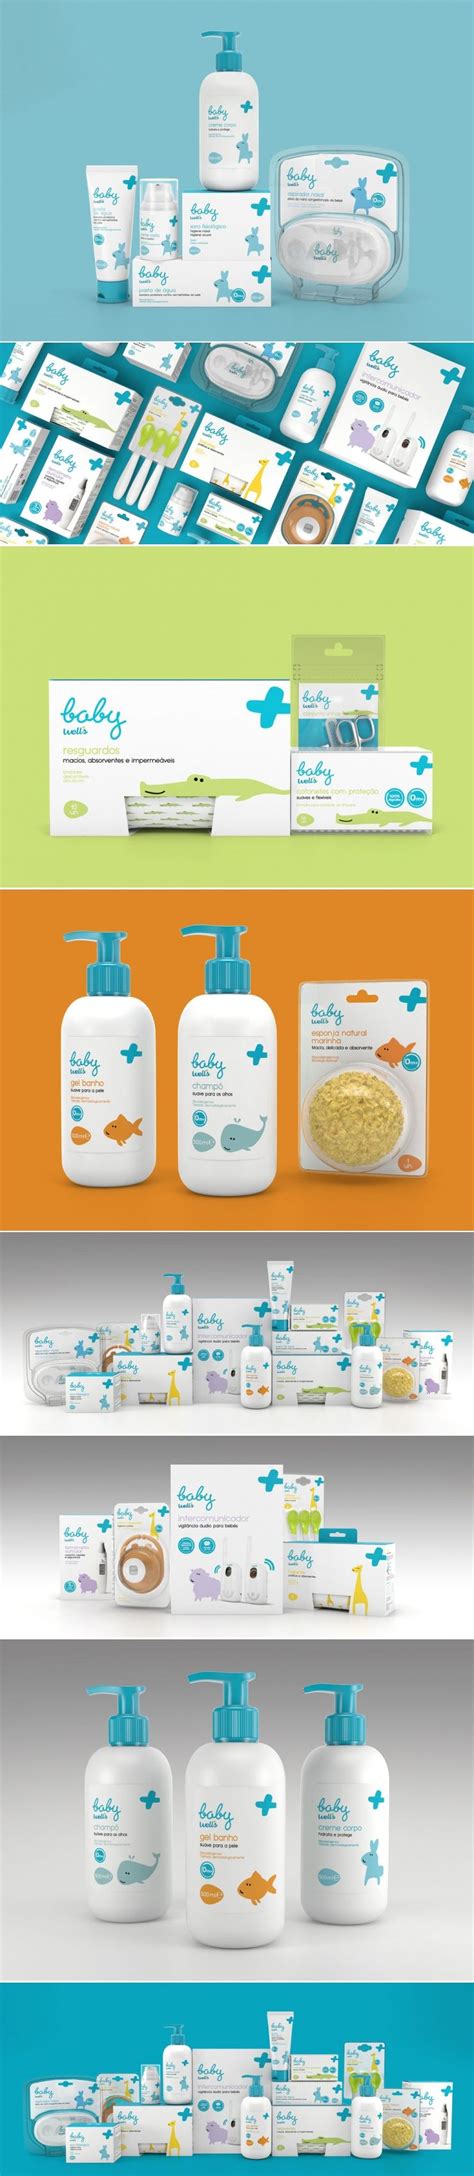 This Range Of Baby Care Comes With A Clean Yet Adorable Look Baby